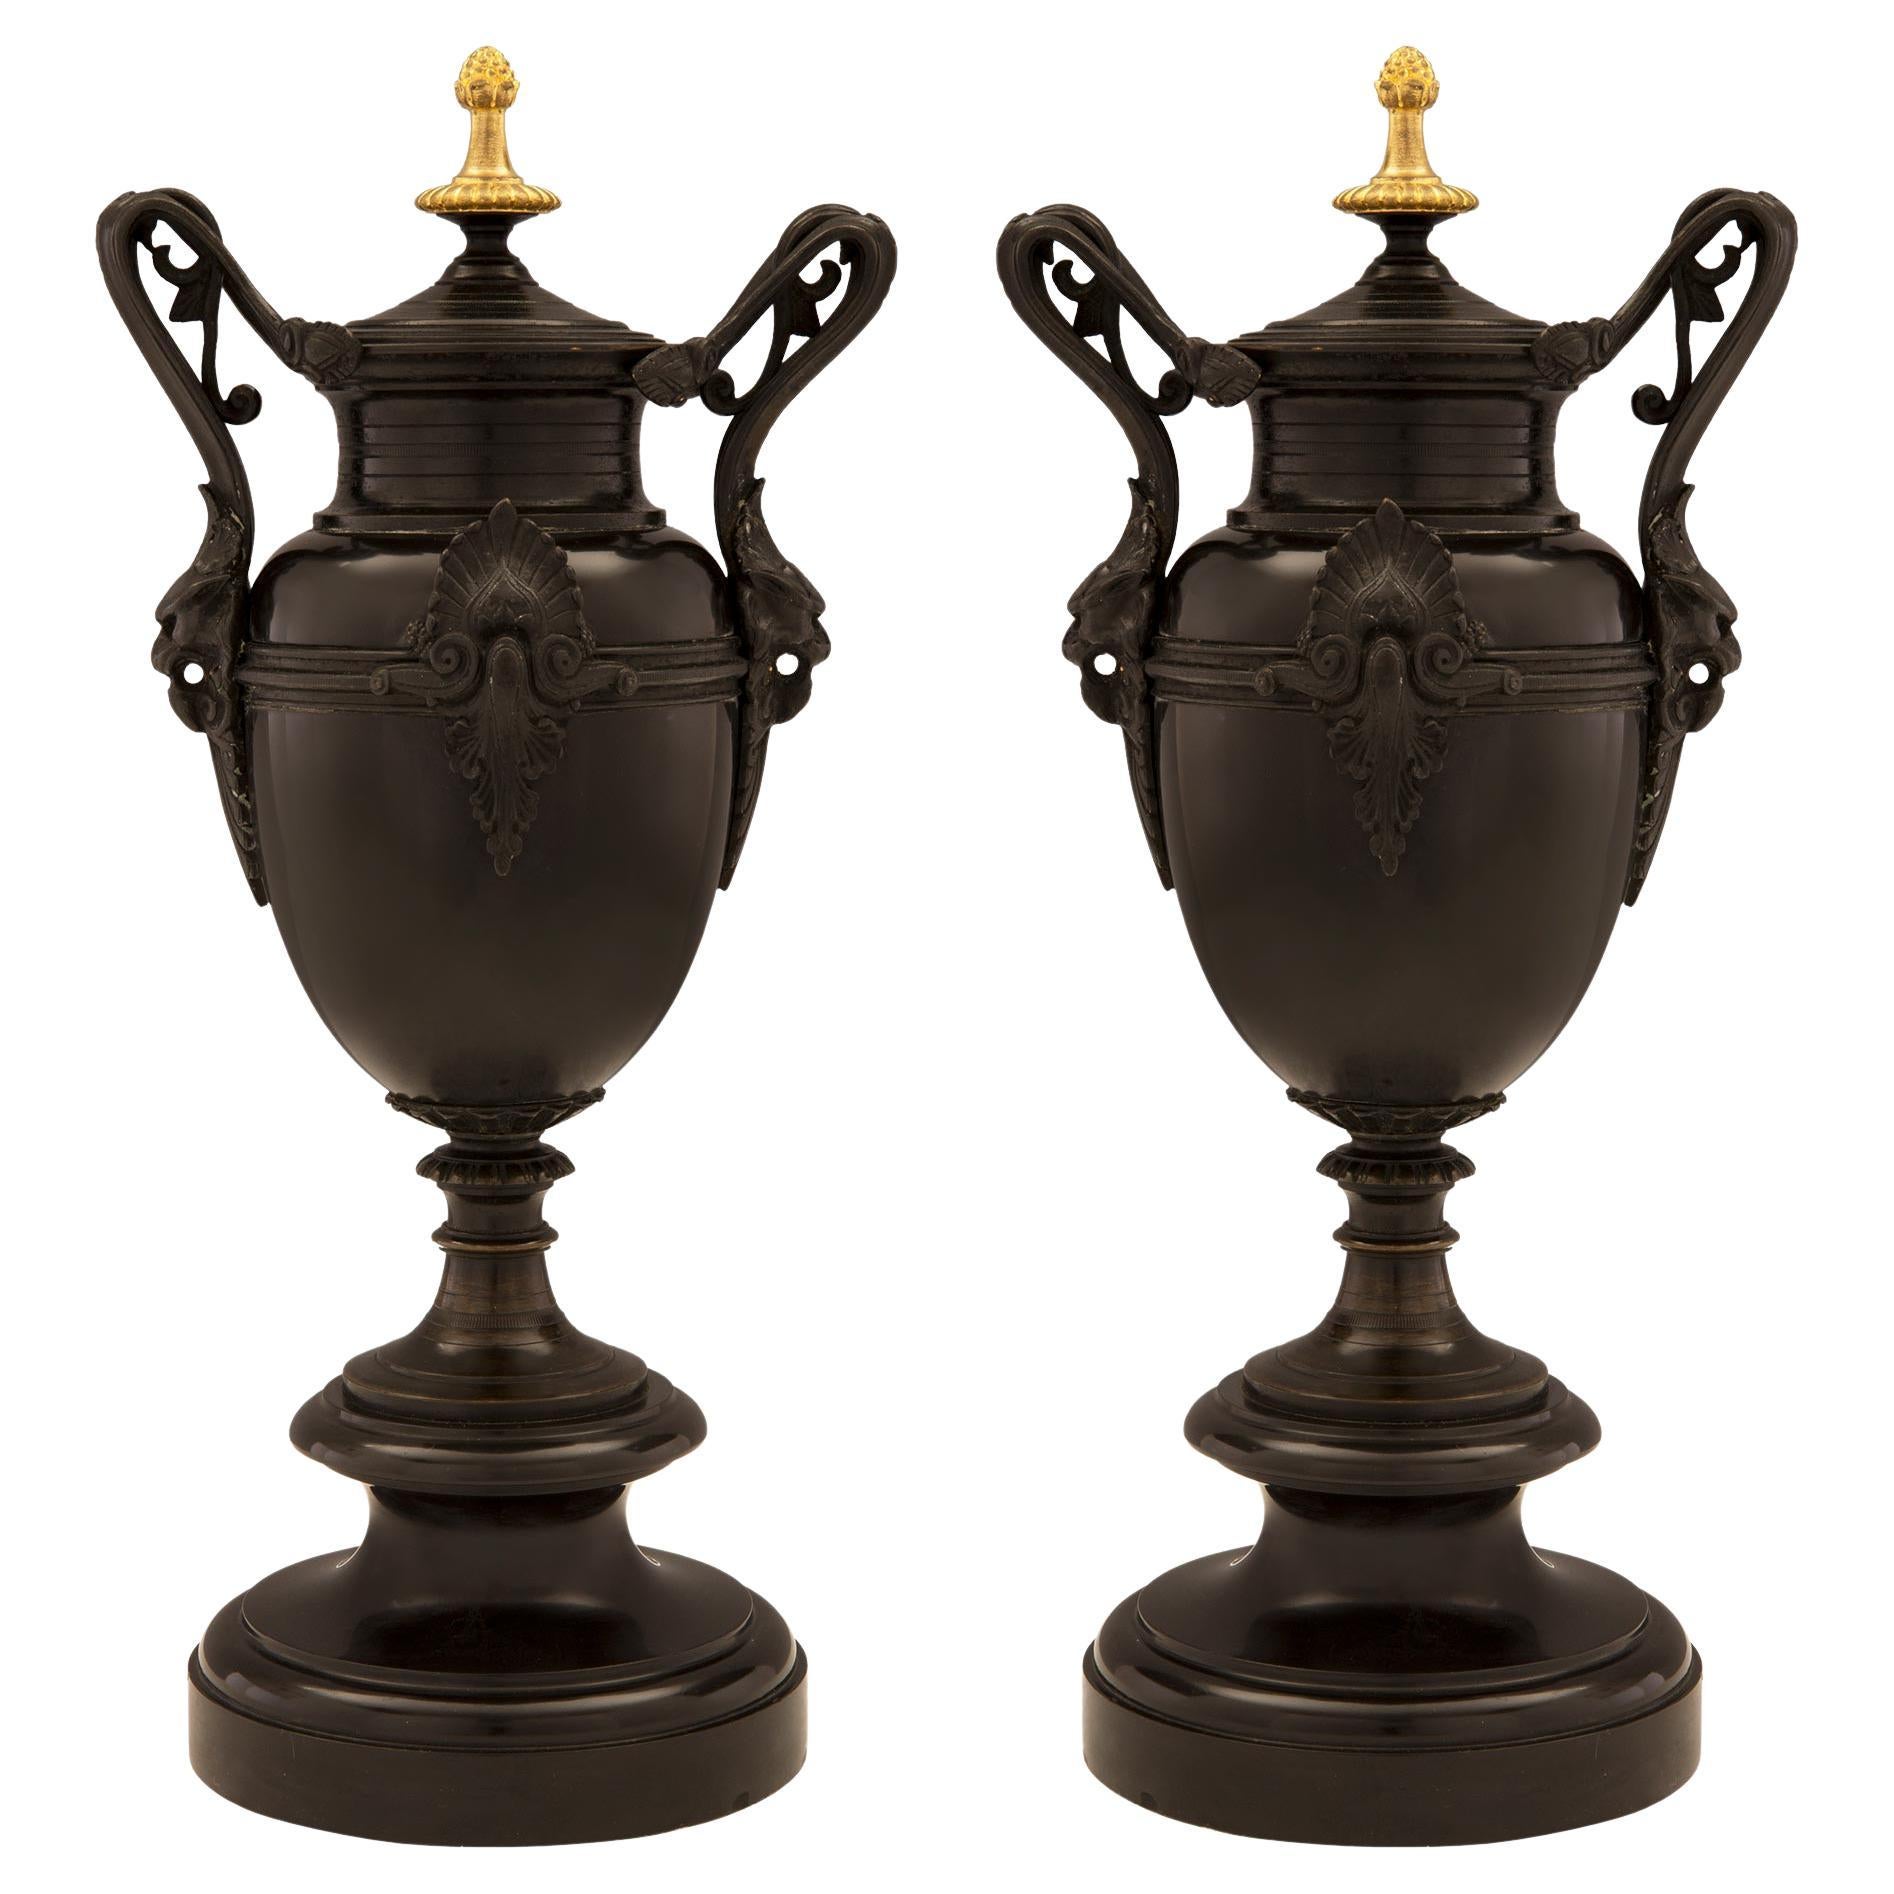 Pair of French 19th Century Renaissance Style Patinated Bronze and Ormolu Urns For Sale